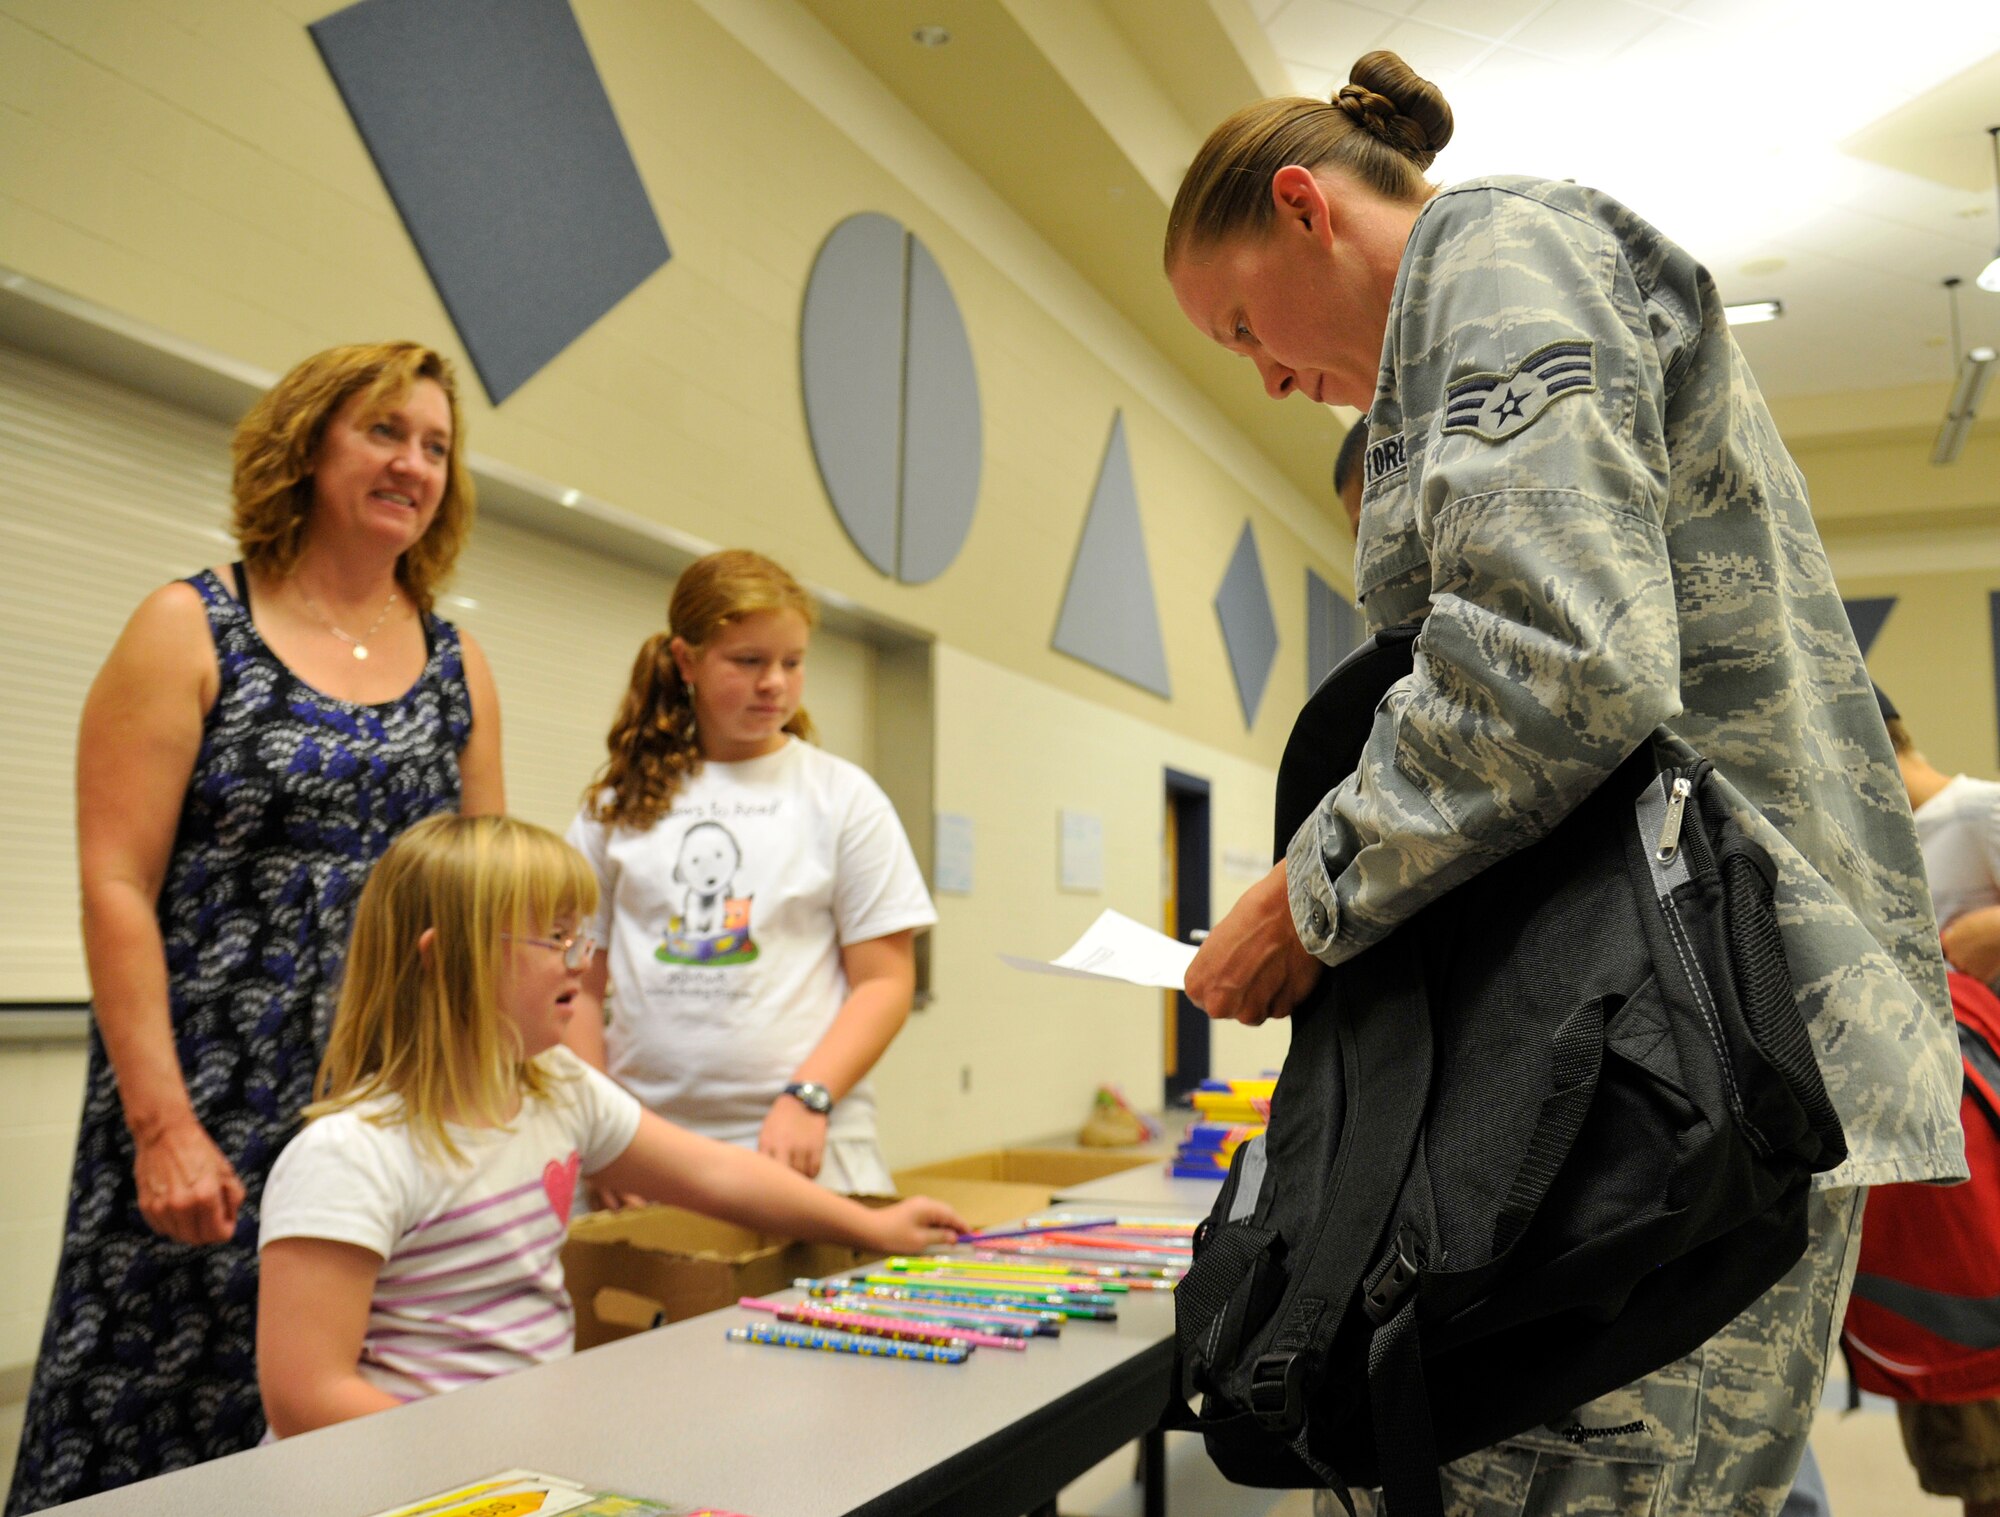 Marlee McDaniel hands out school supplies to Senior Airman Laura Clay during Operation Homefront’s Back-to-School Brigade in the Michael Anderson Elementary School gymnasium at Fairchild Air Force Base, Washington, Aug. 7, 2014. Operation Homefront was formed in 2002 and since then has used 128 million dollars to help military families. Clay is a 92nd Logistics Readiness Squadron aircraft parts store journeyman. (U.S. Air Force photo by Senior Airman Ryan Zeski/Released)